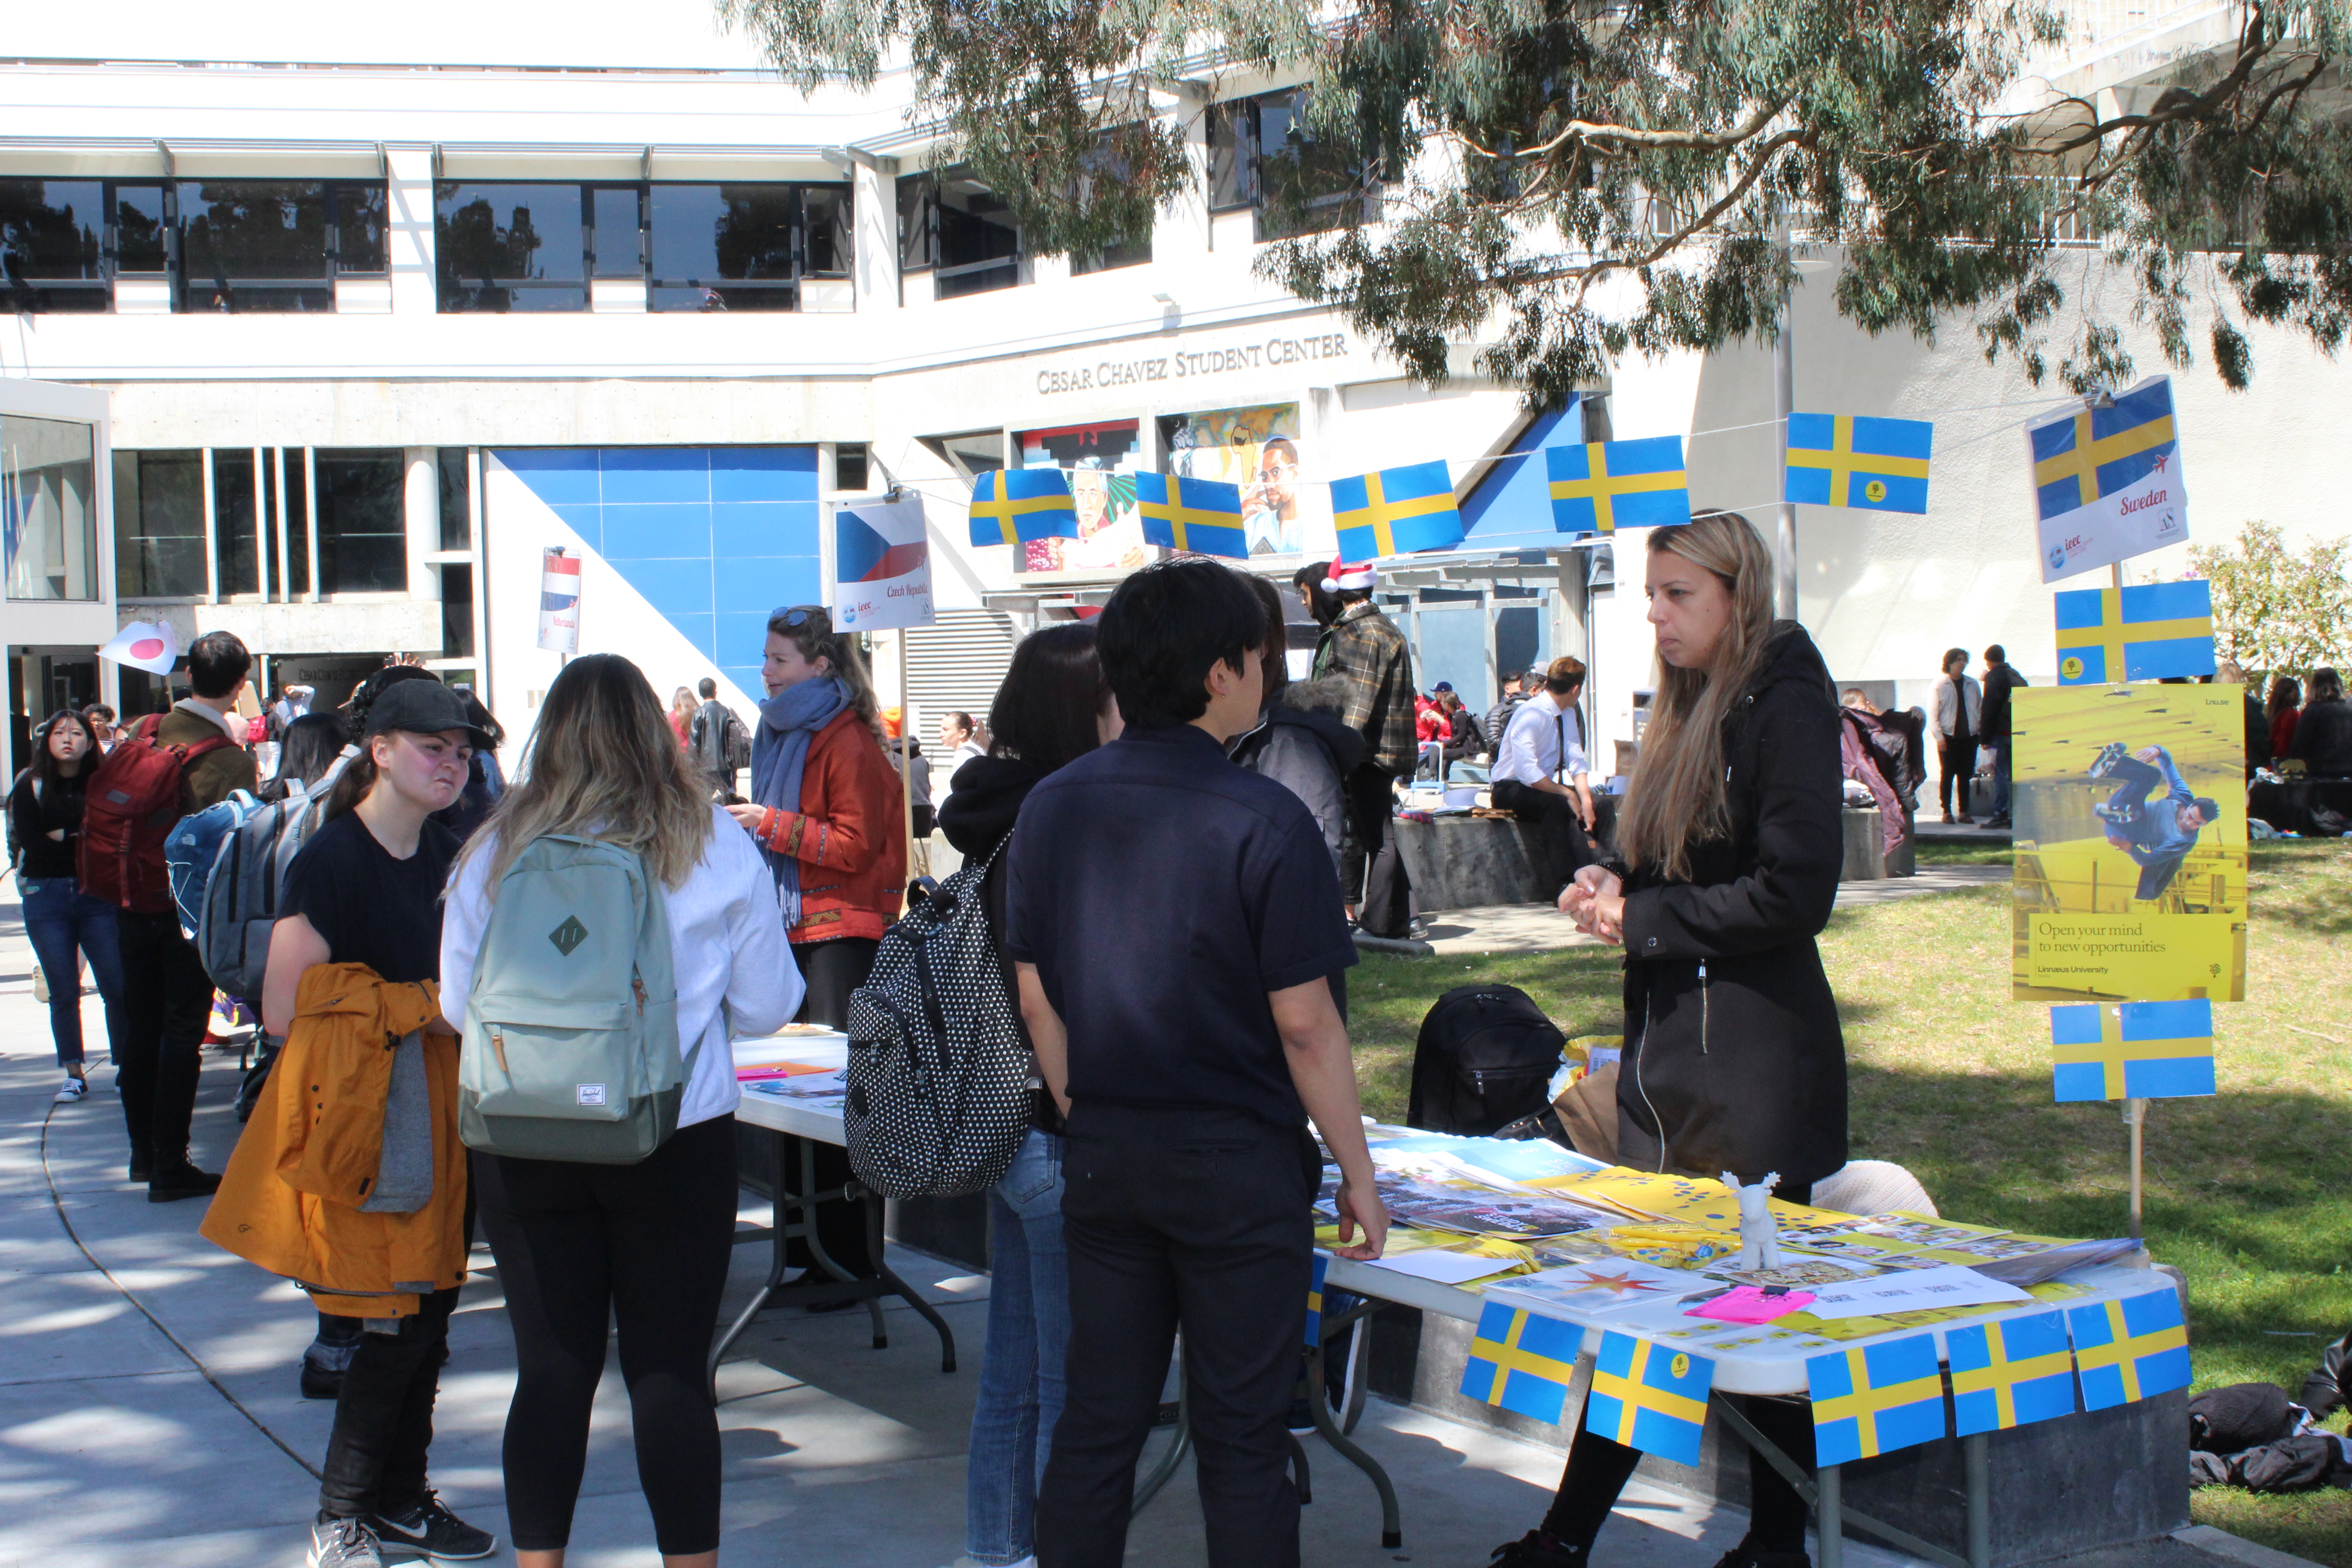 Students gathered around the Sweden table.